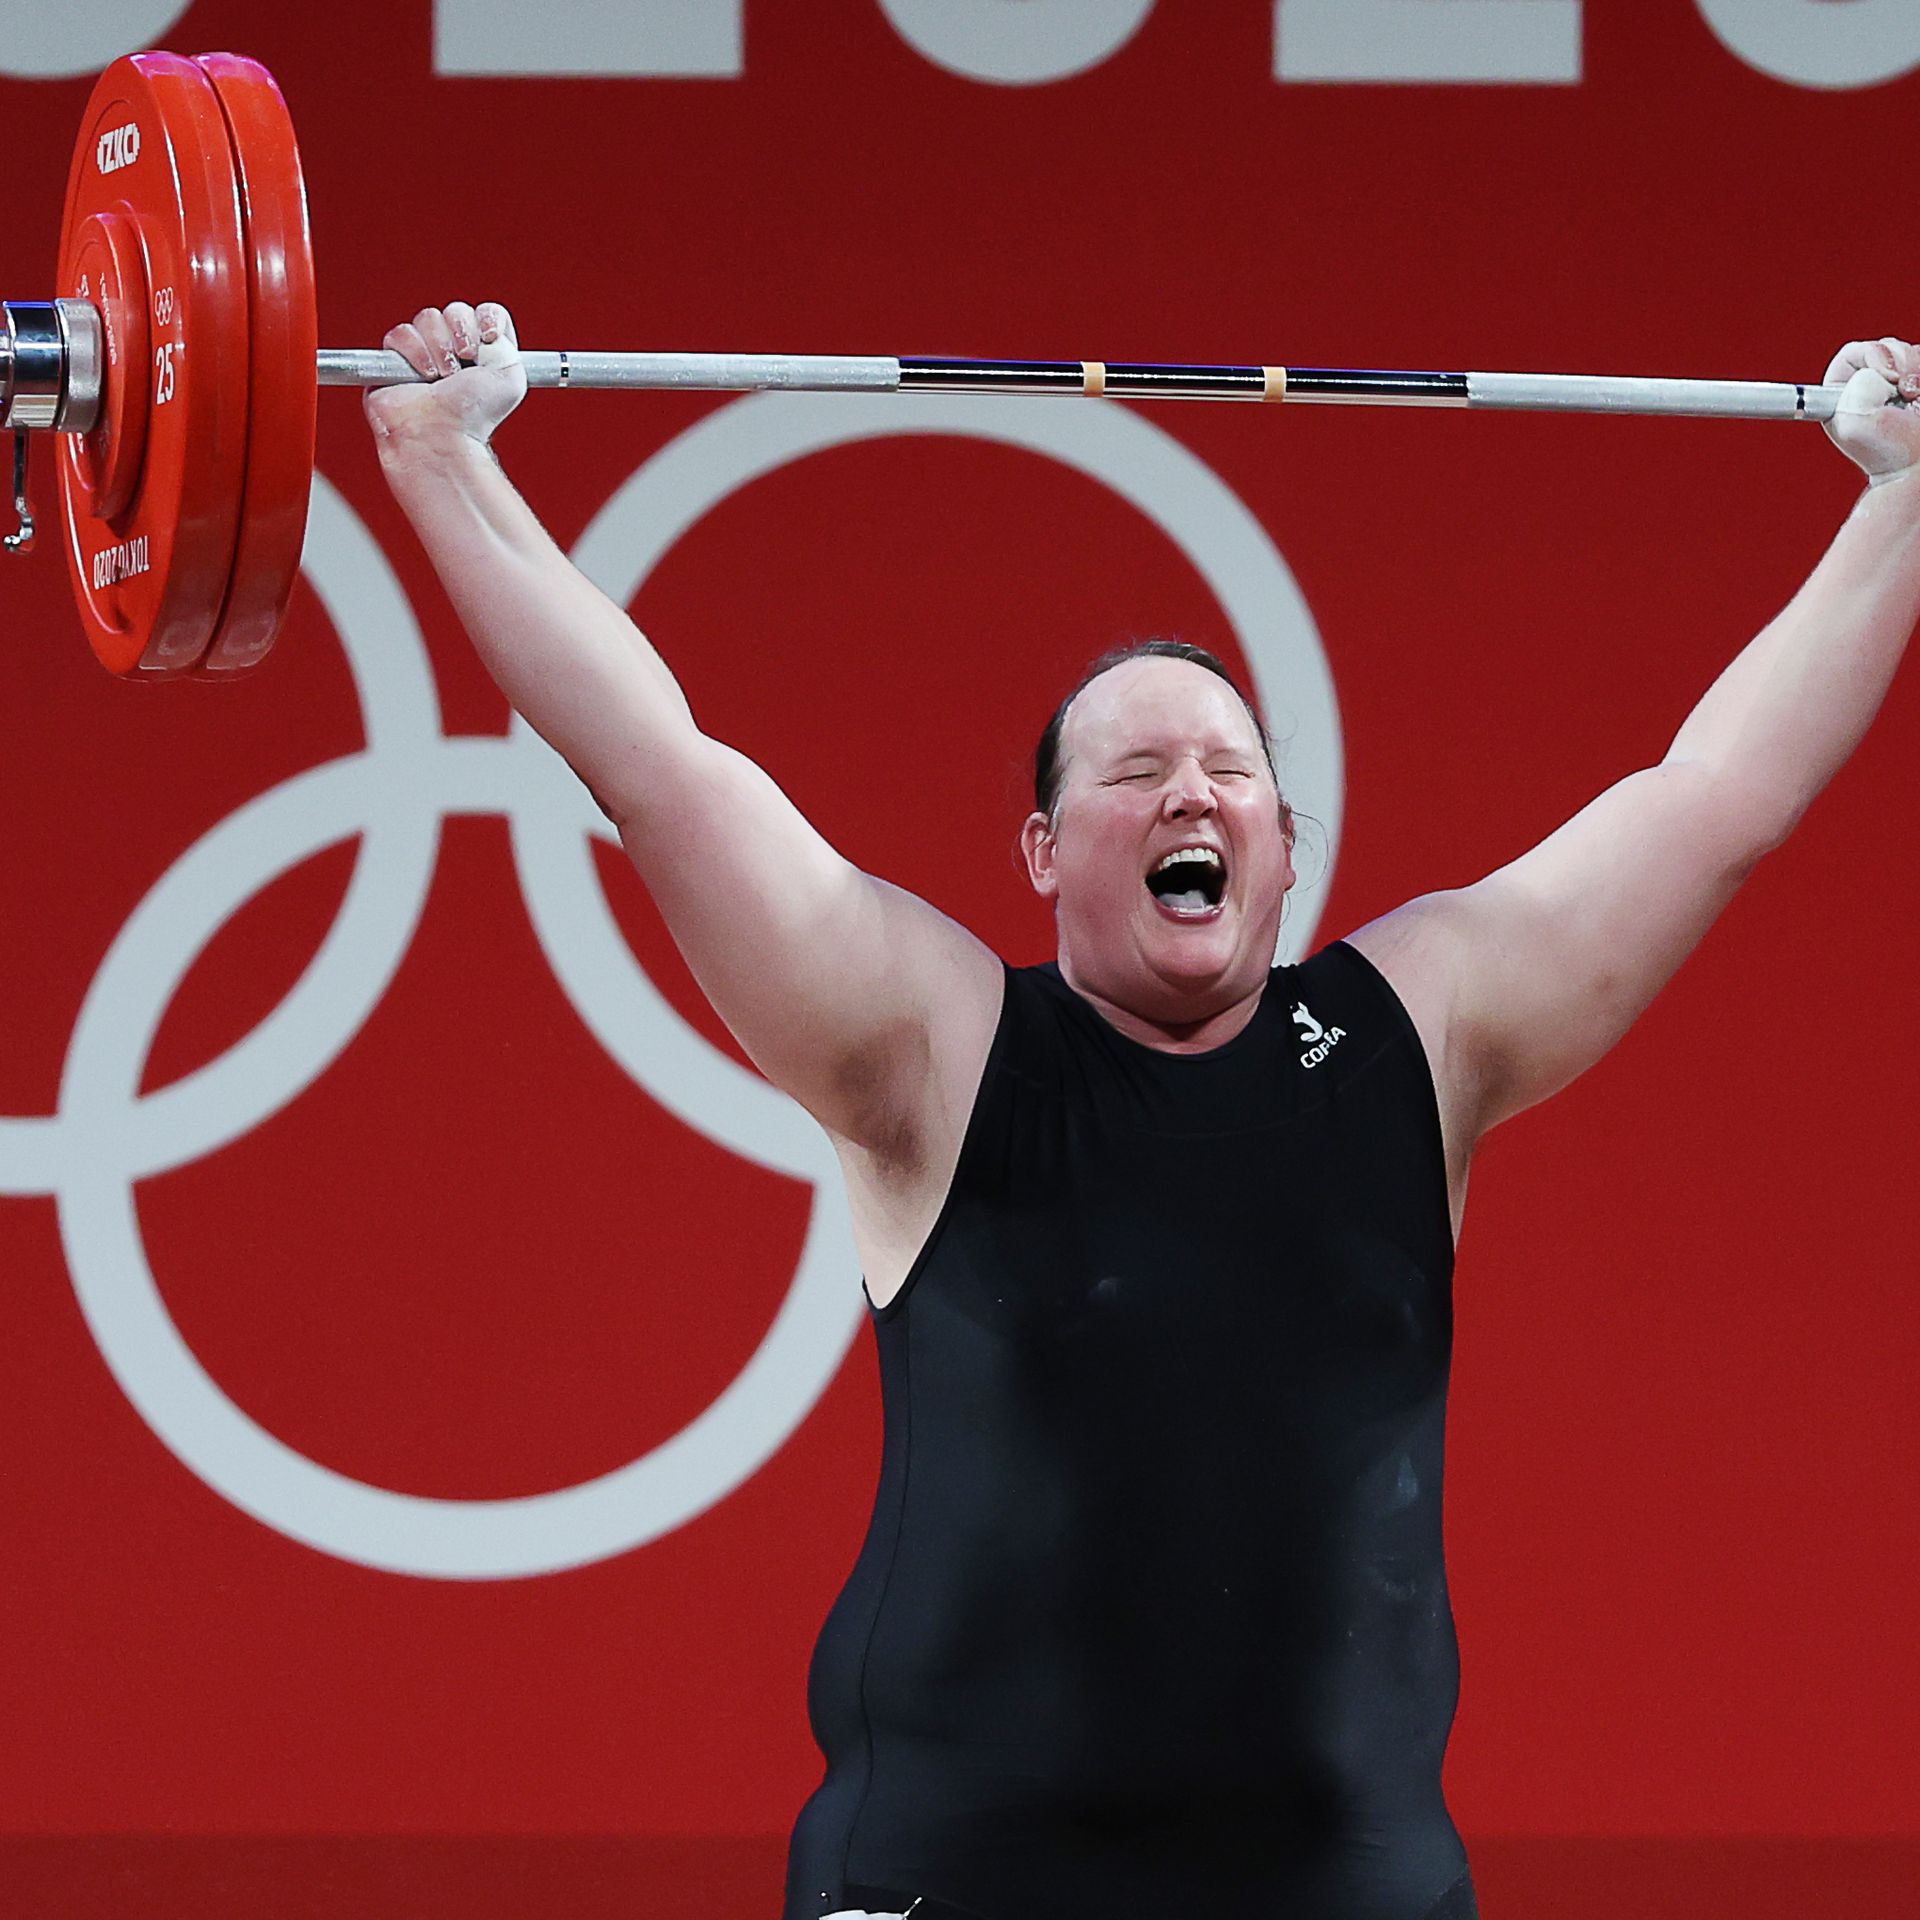 Laurel Hubbard becomes first openly trans woman to compete at Olympics